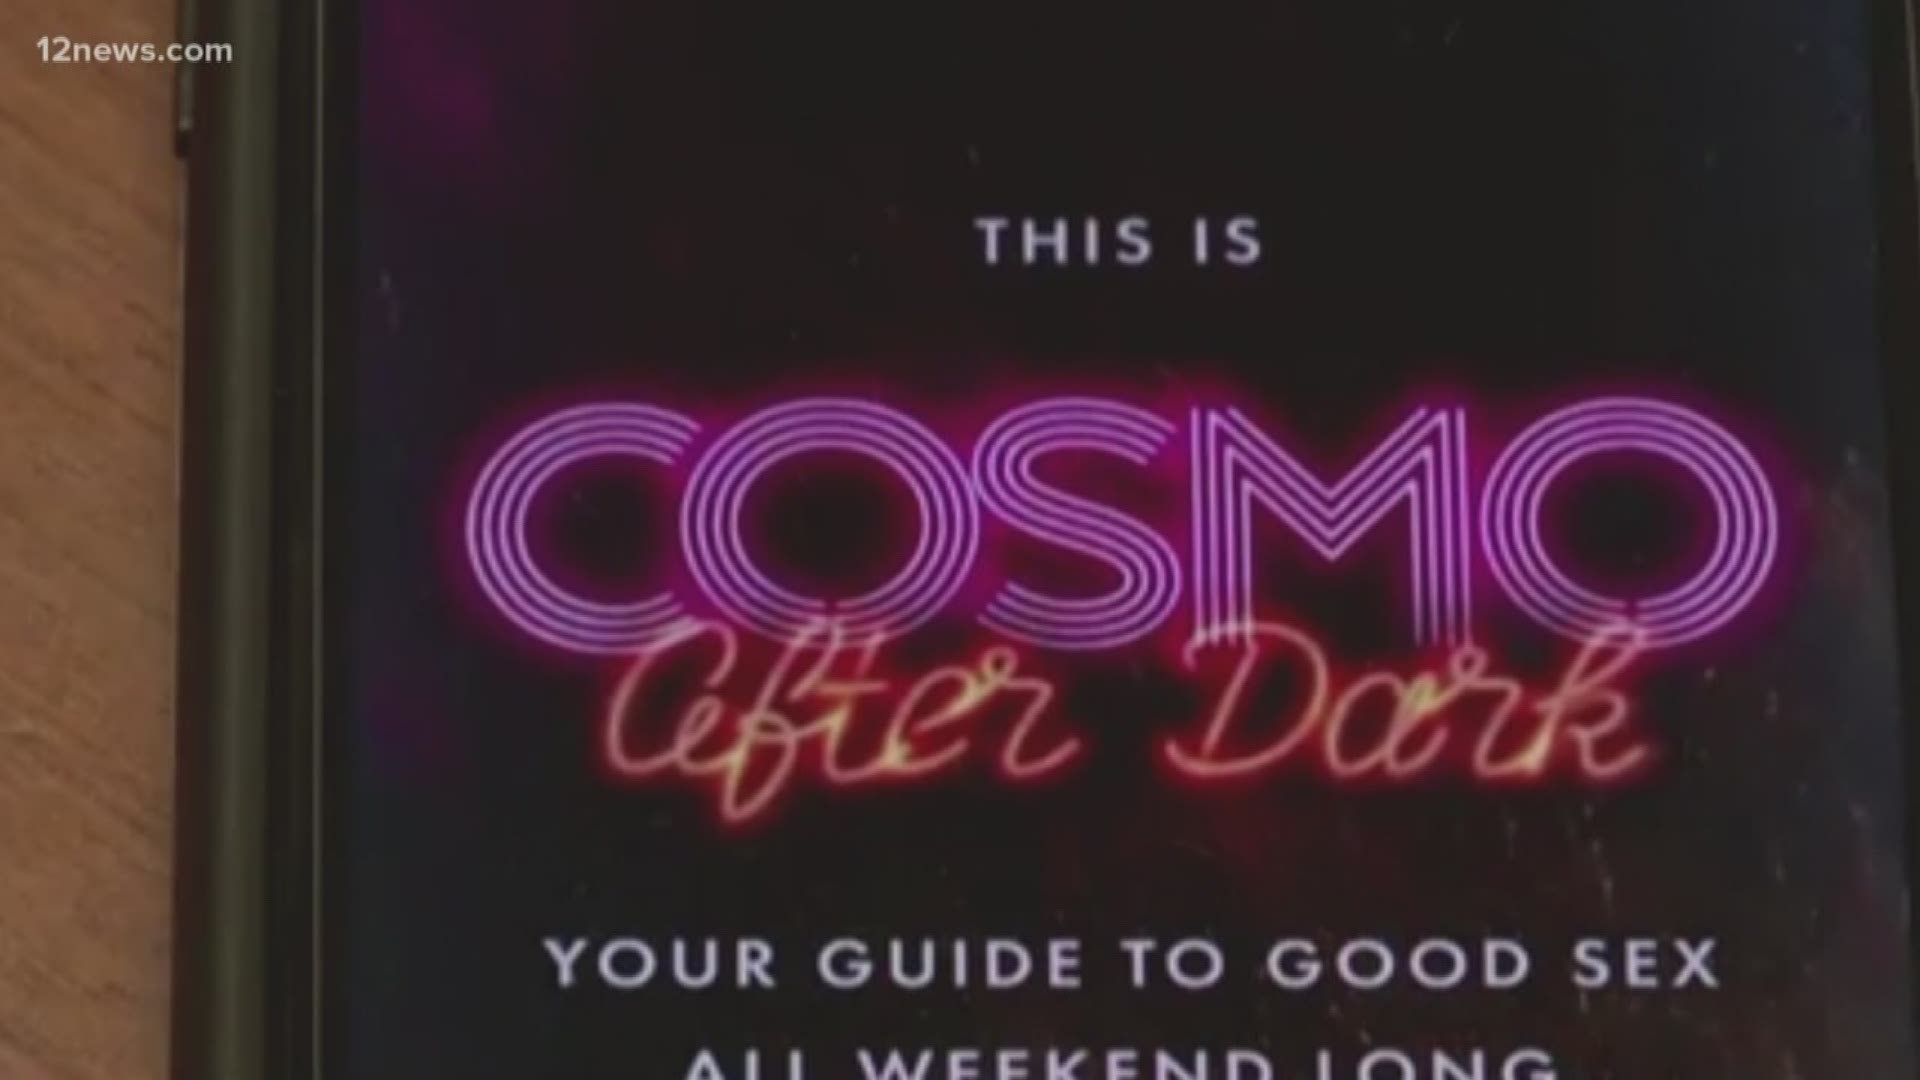 Parents talk about questionable content on social media sites after Snapchat's release of "Cosmo After Dark."